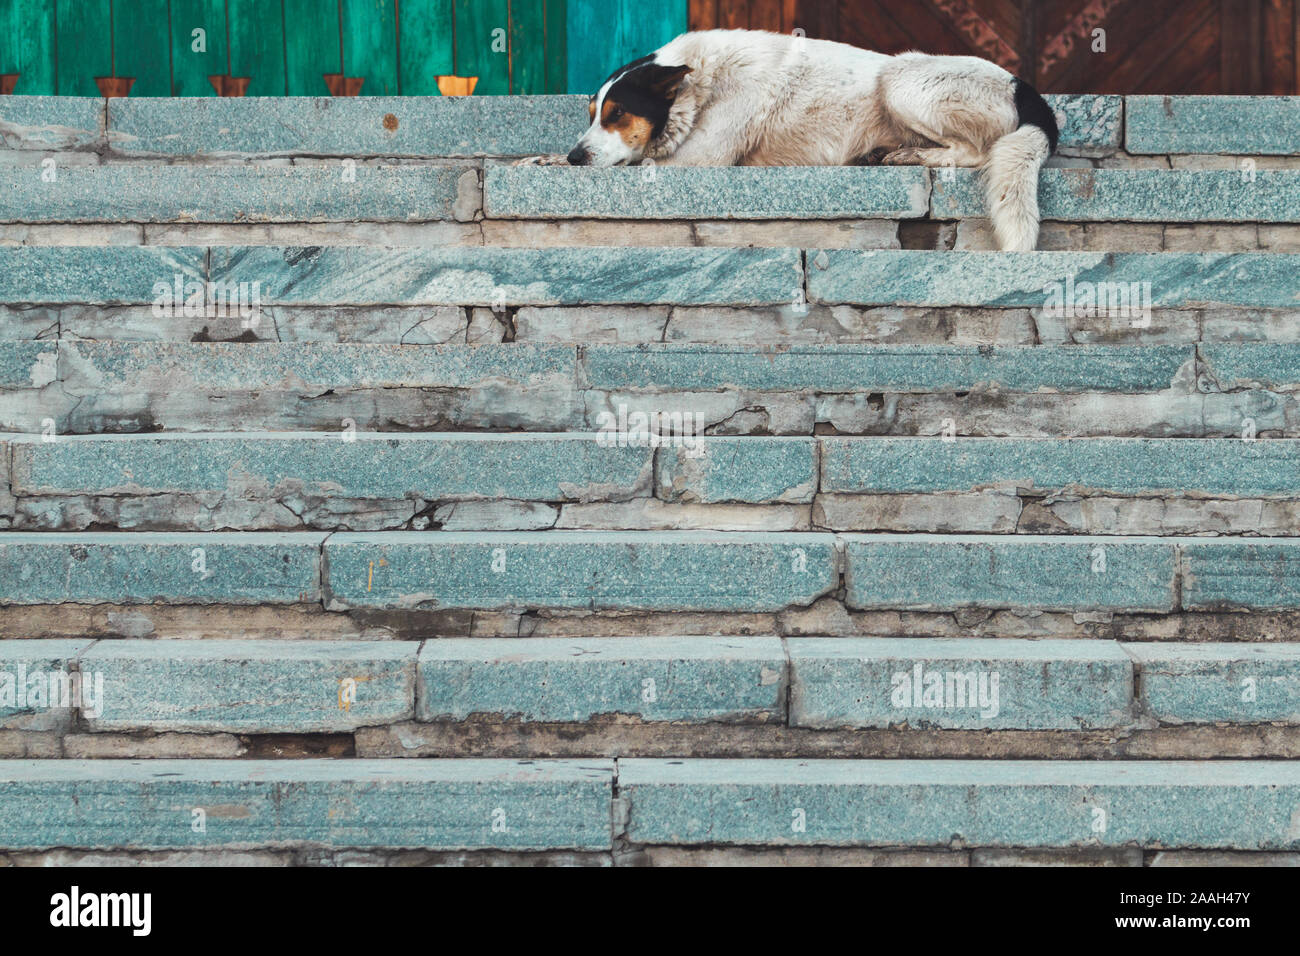 dog is on top of the stairs Stock Photo